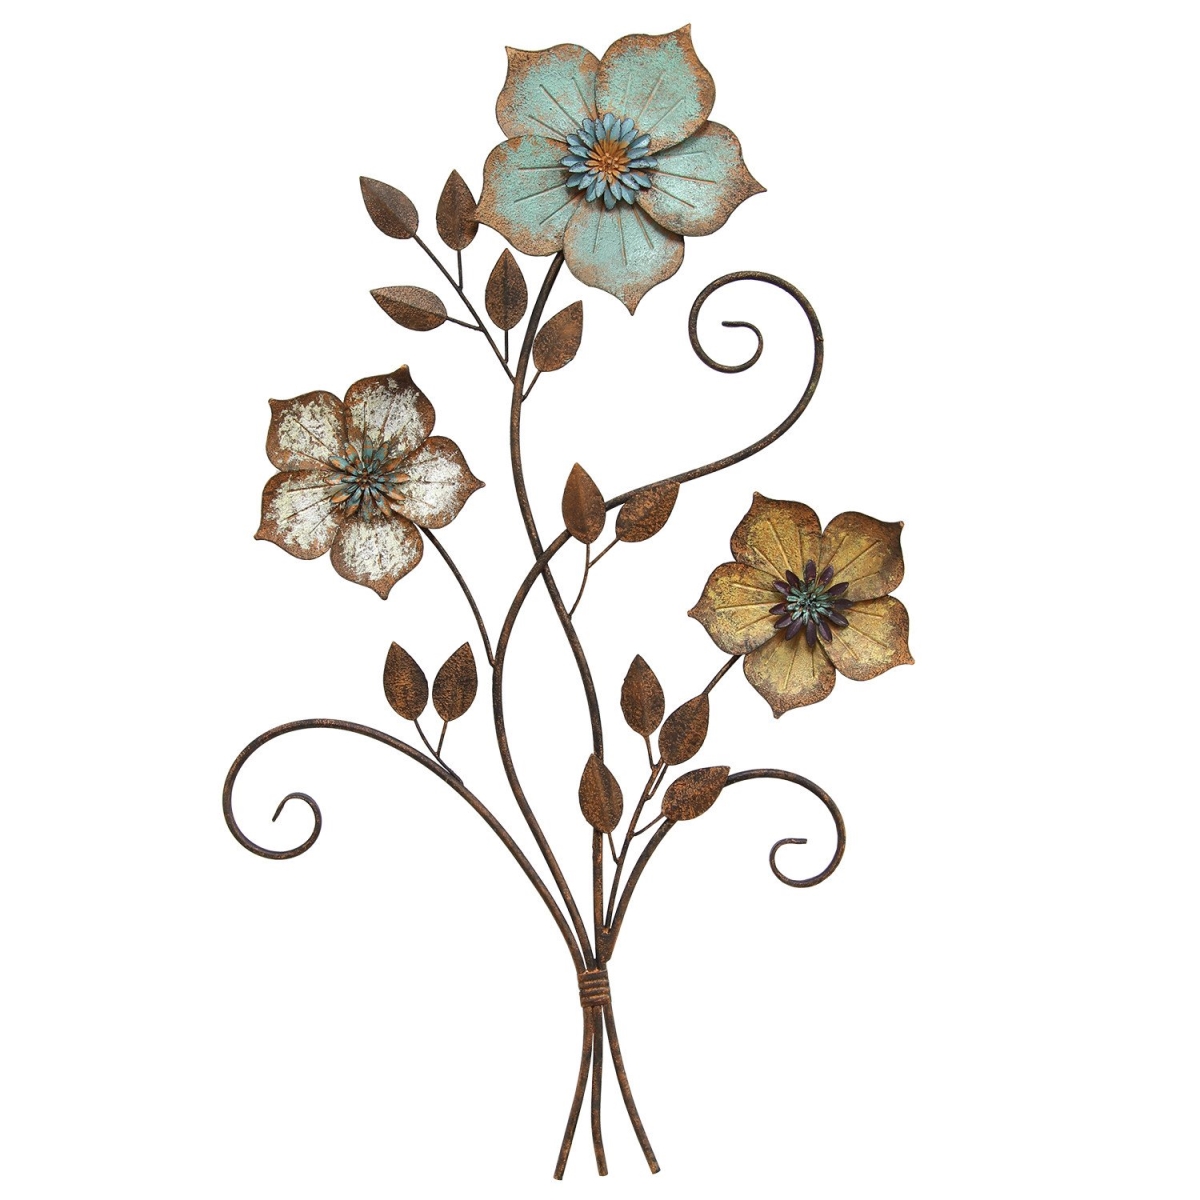 Home Roots 321086 Tricolor Flower Wall Decor, Multicolor